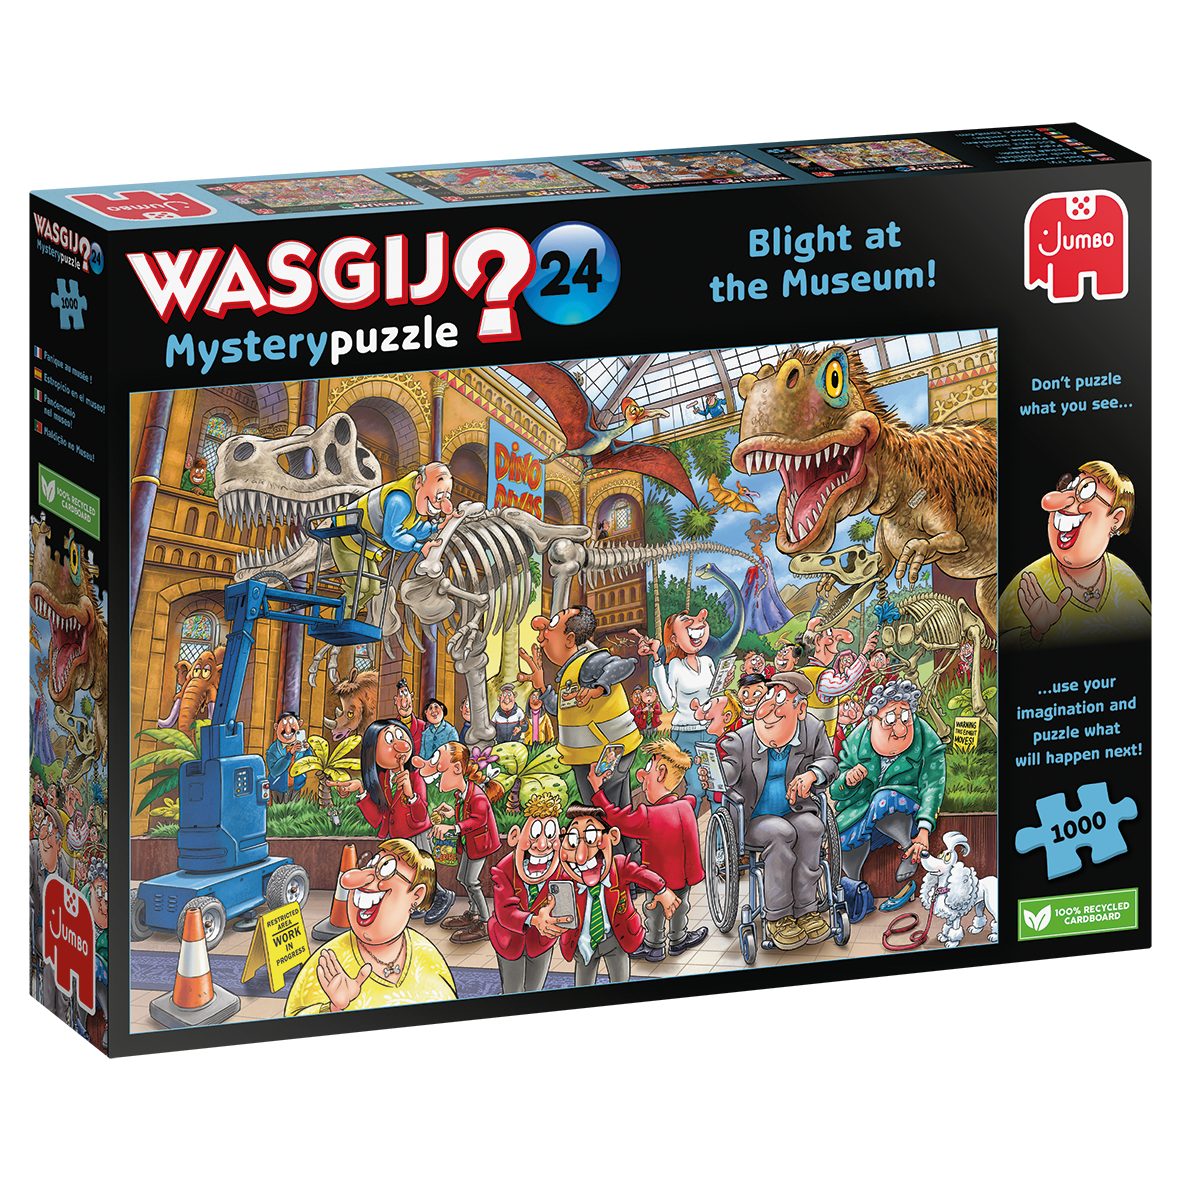 Jumbo Spiele Puzzle Wasgij Mystery 24 Blight 1000 at Museum!, Puzzleteile the